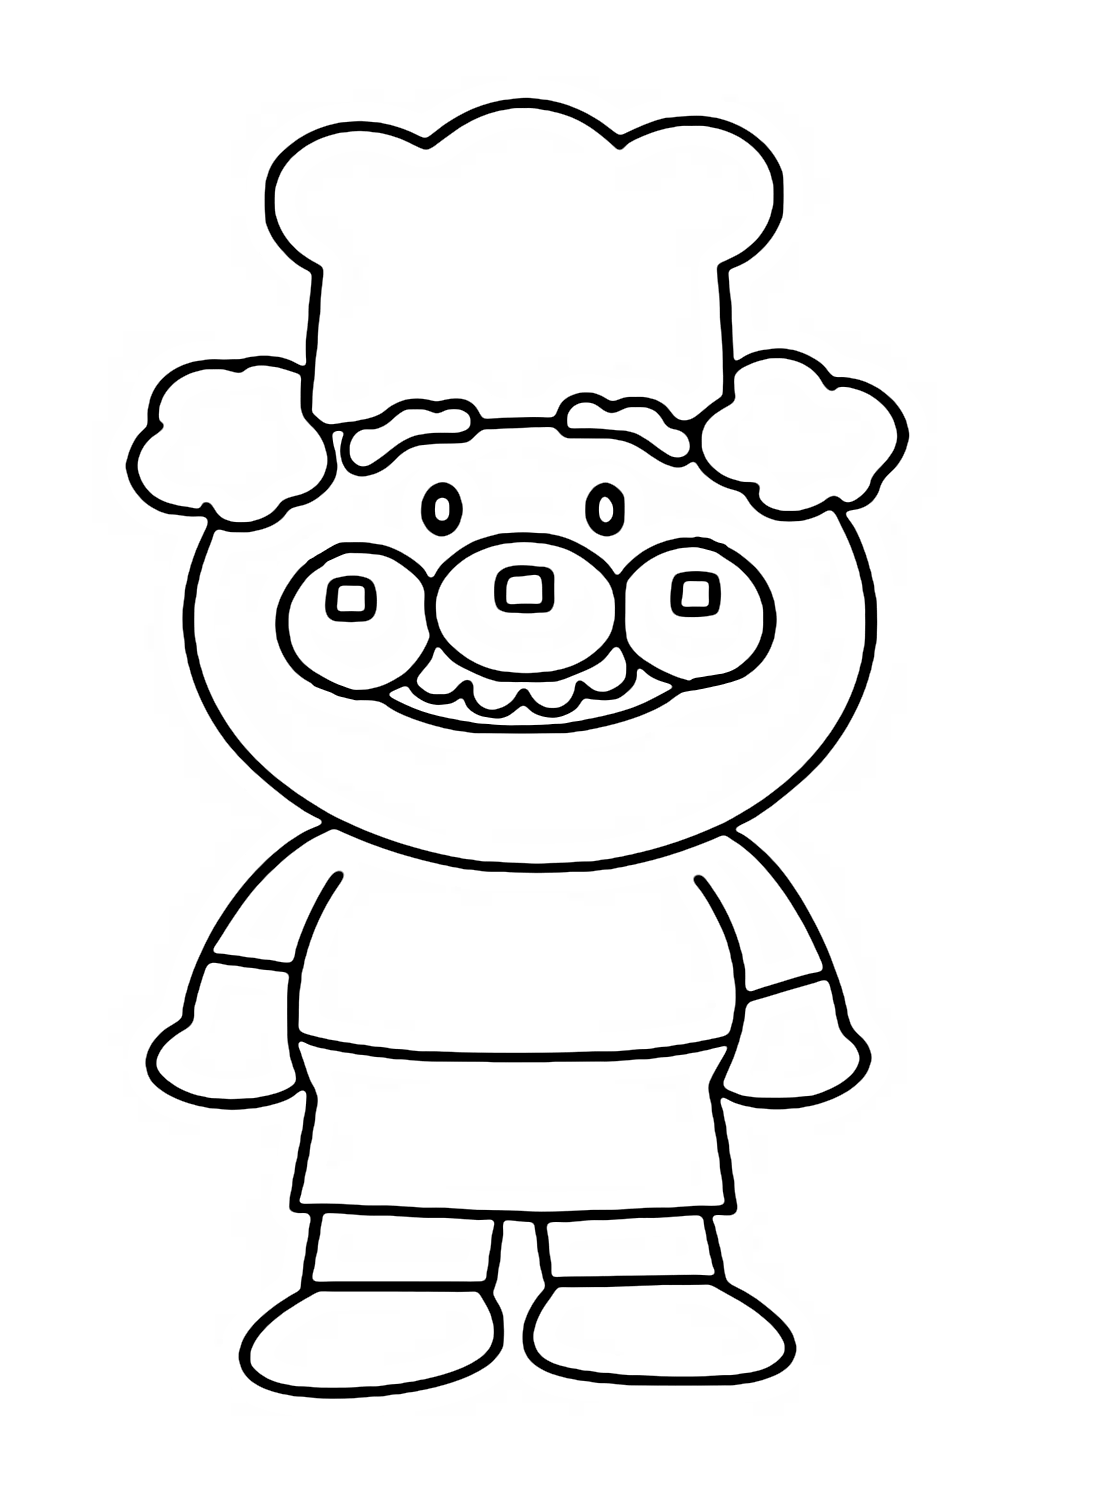 Uncle Jam from Anpanman Coloring Pages